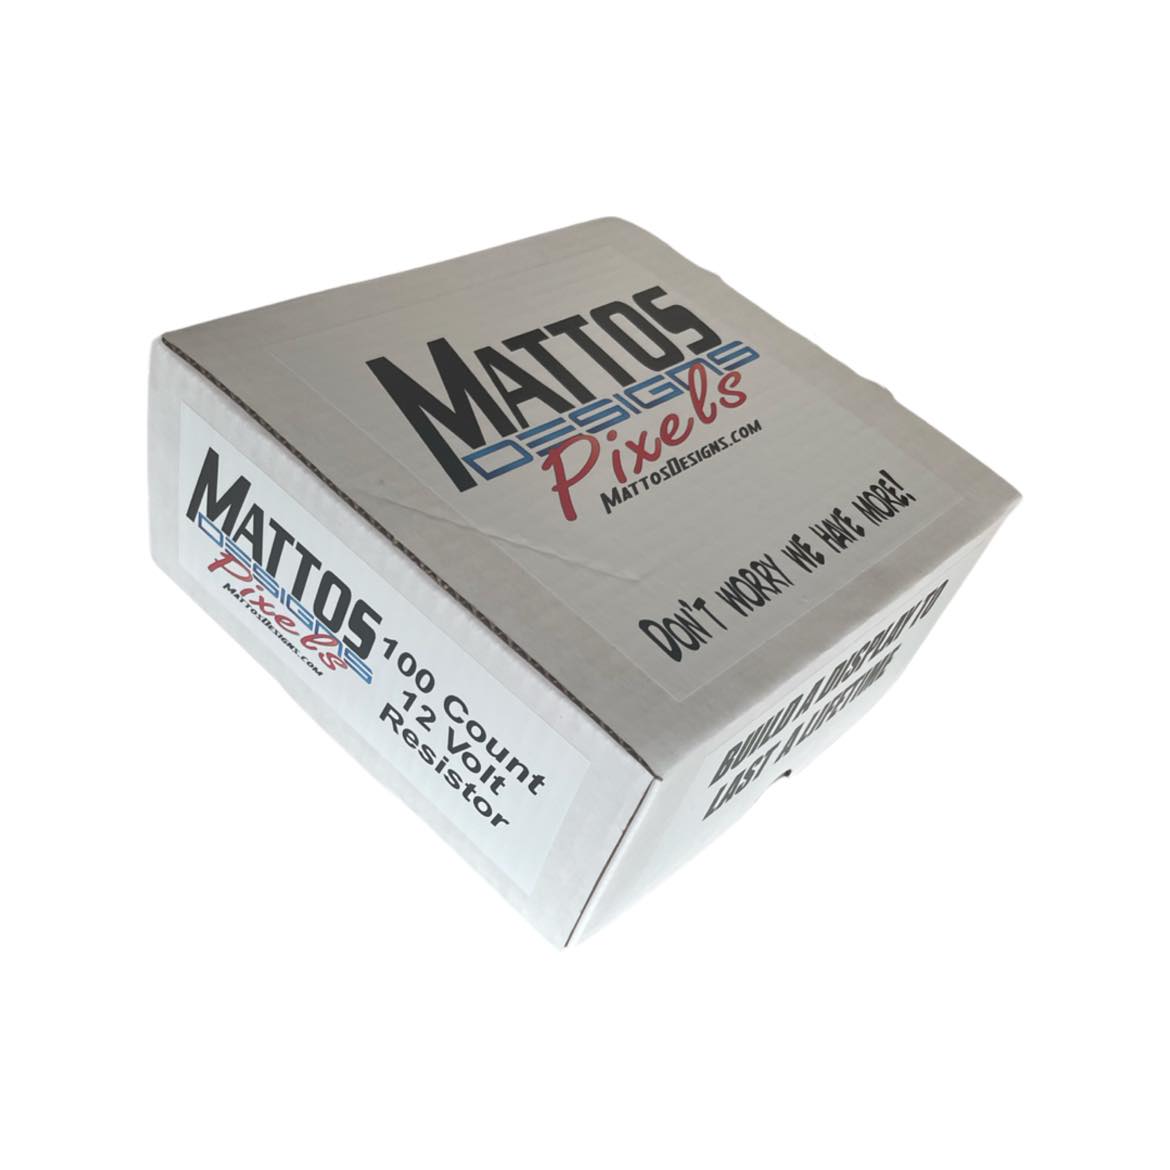 Mattos Designs 12v Resistor Pixels / 4in Spacing / Box of 4x25ct / xConnect